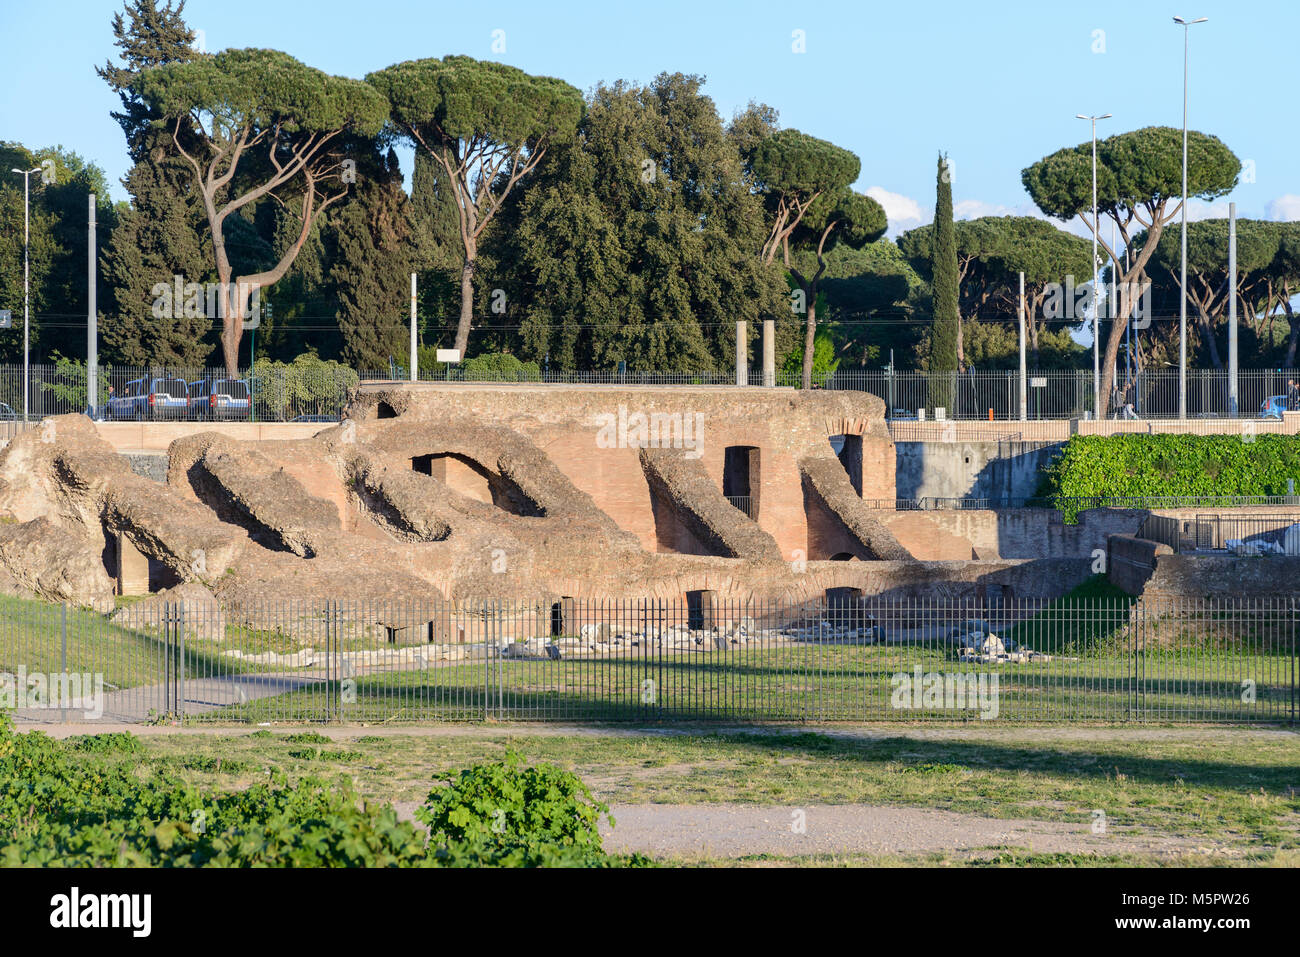 The Circus Maximus Ruins In Italian Circo Massimo An Ancient Roman Chariot Racing Stadium And Mass Entertainment Venue Located In Rome Italy Stock Photo Alamy